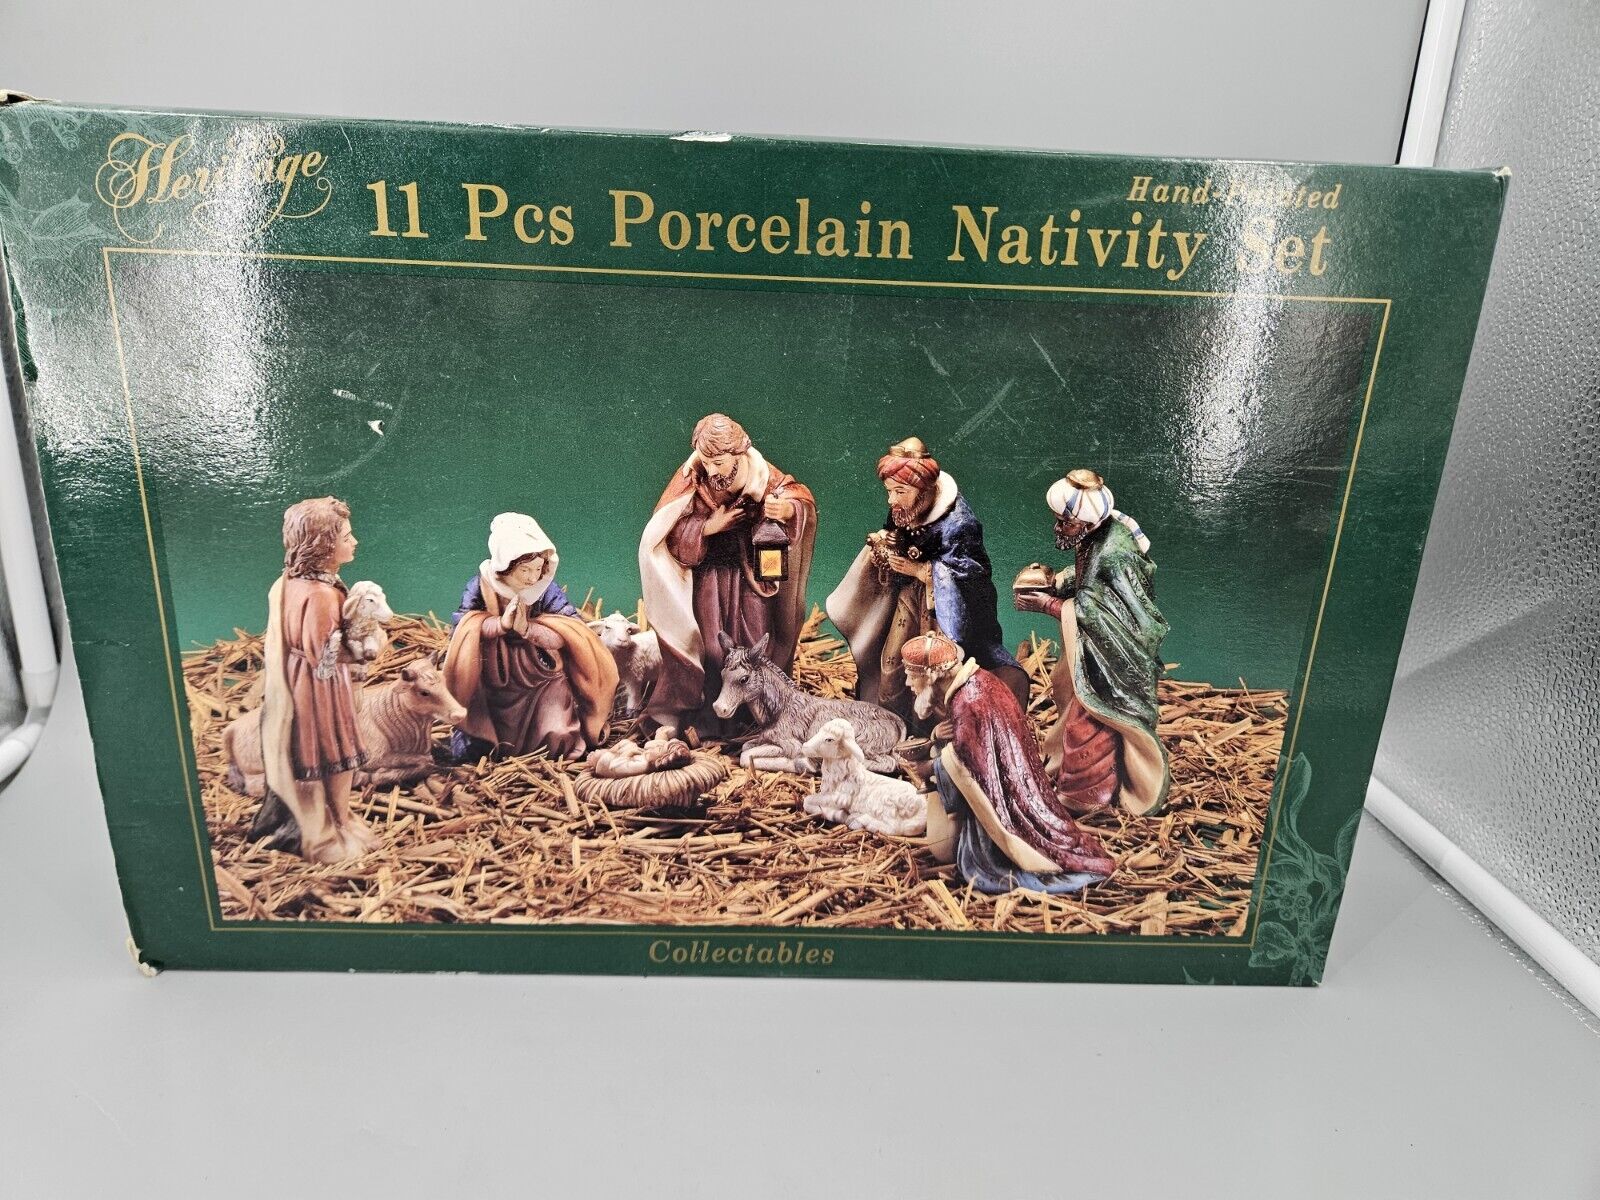 VINTAGE COLLECTORS CHOICE O'WELL HERITAGE PORCELAIN NATIVITY SCENE 11 PIECE